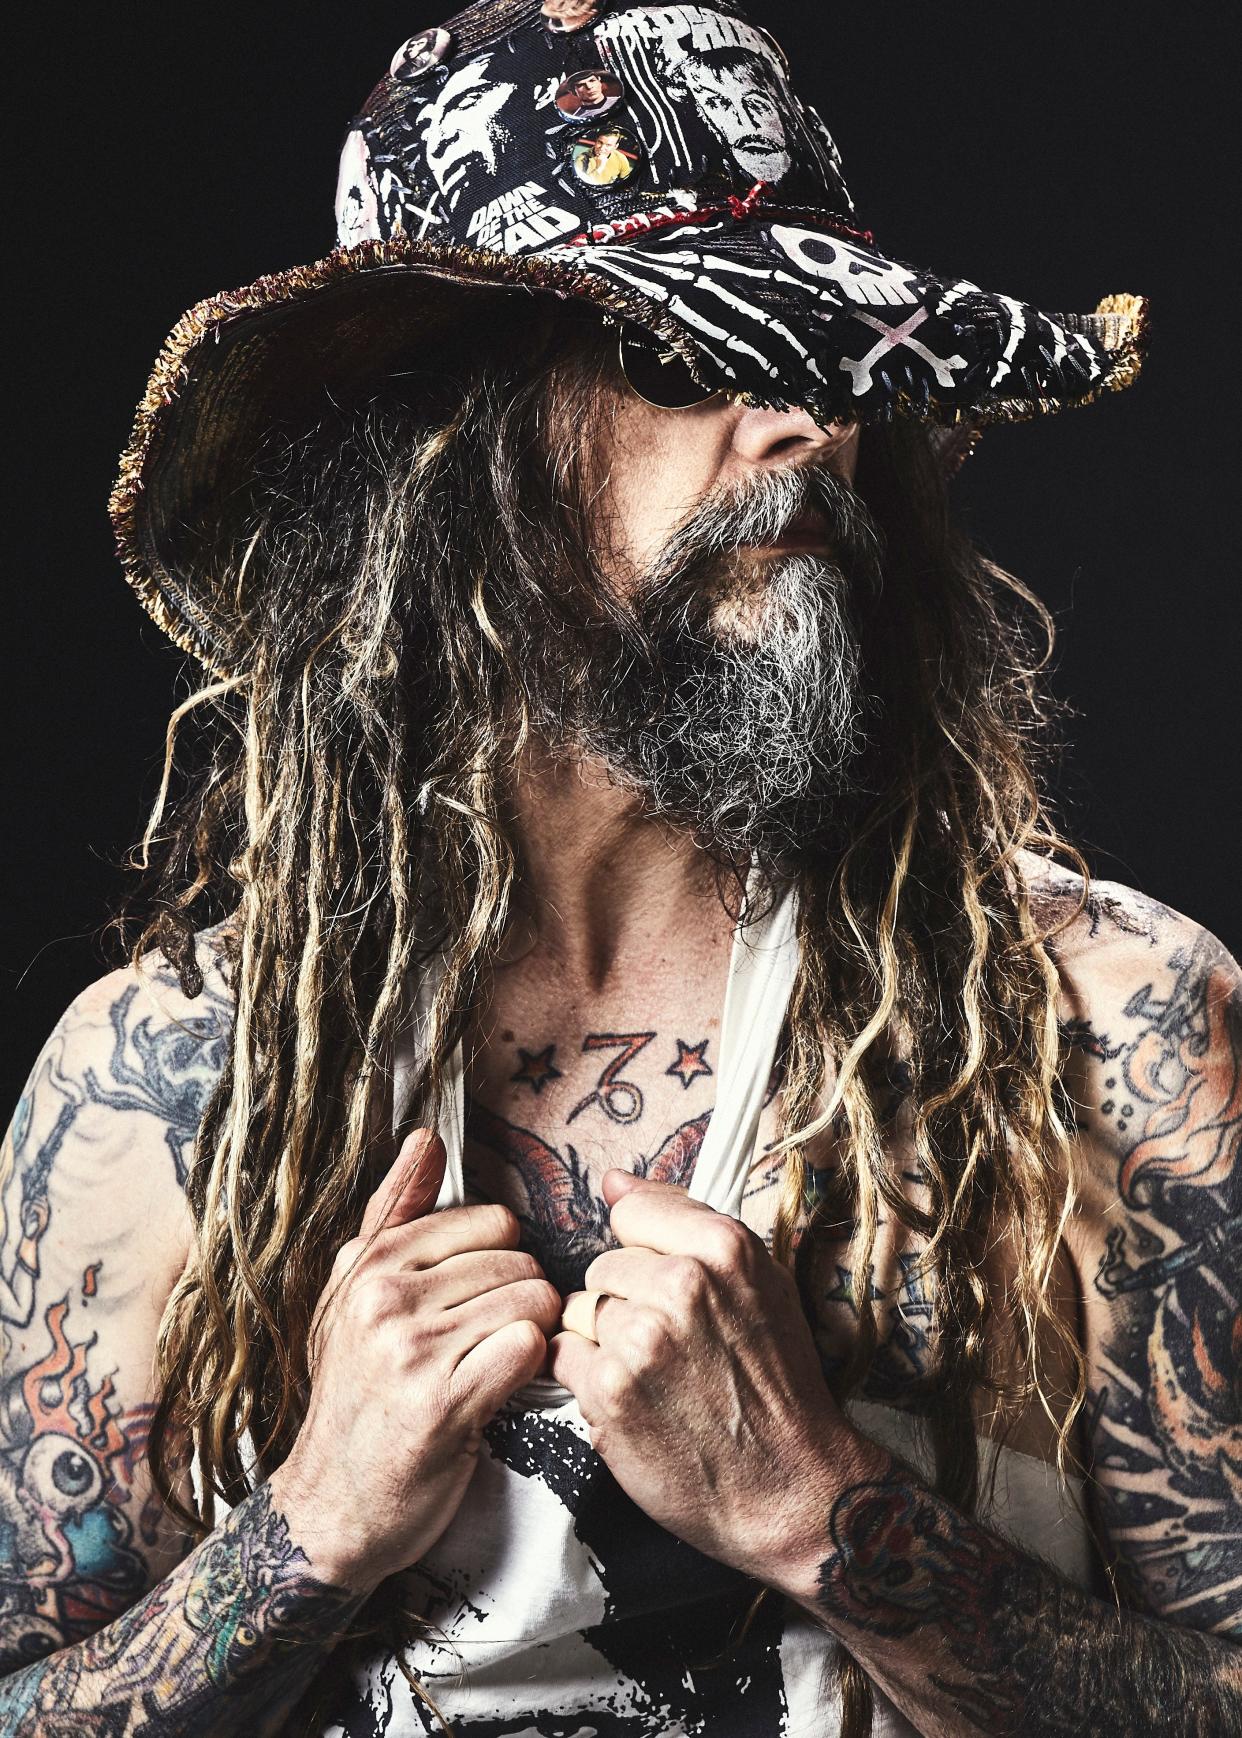 Rob Zombie performs in Des Moines next September.